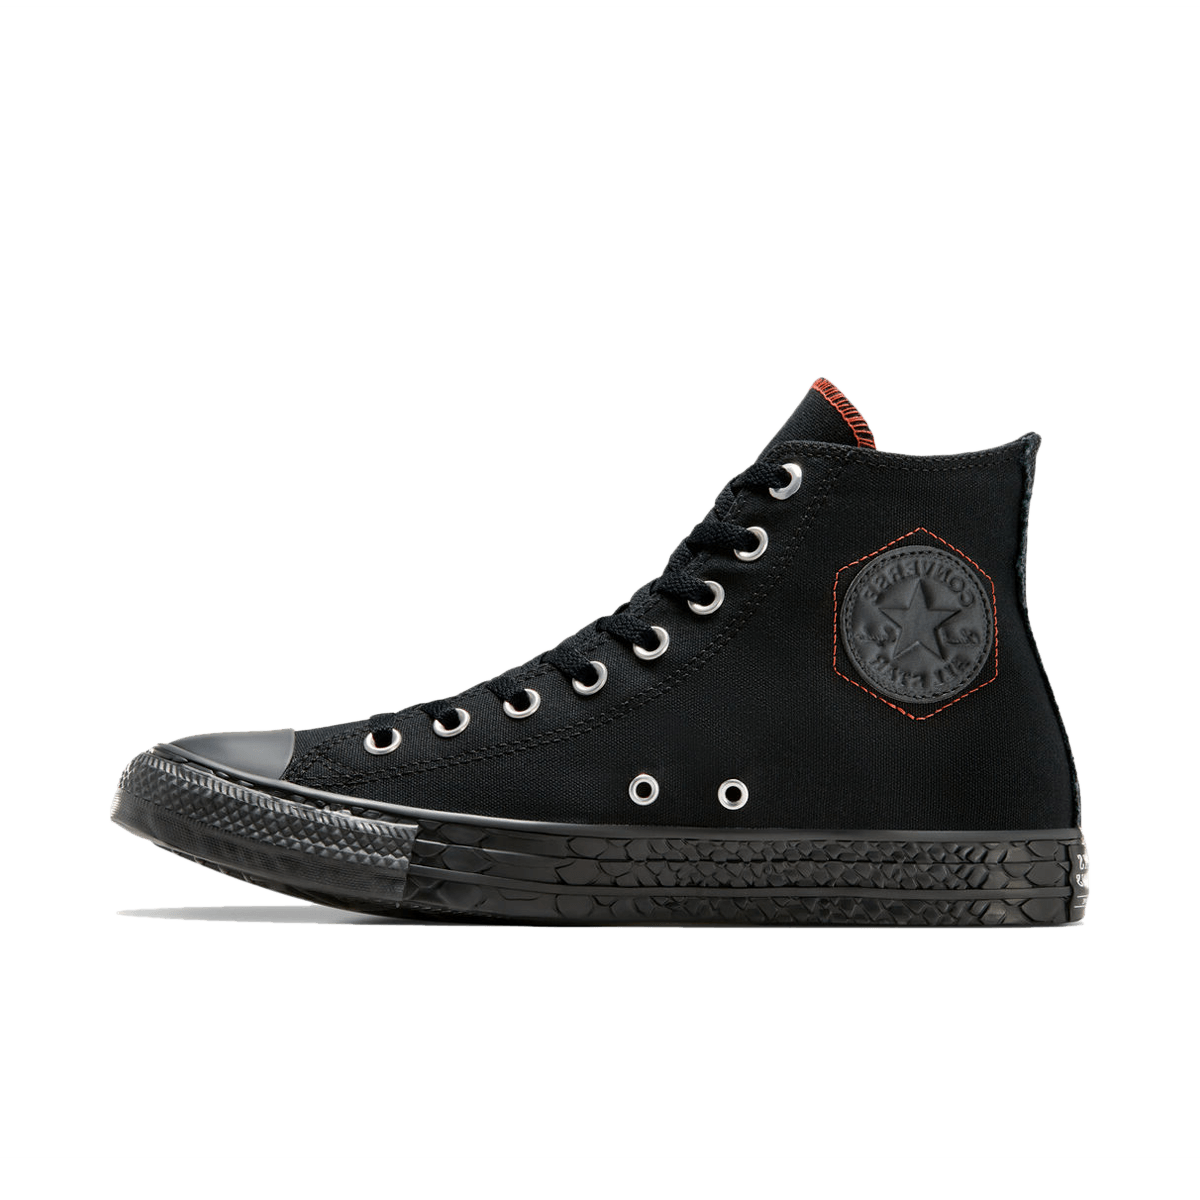 Dungeons & Dragons x Converse Chuck Taylor All Star 'Dragon Scales' A09886C